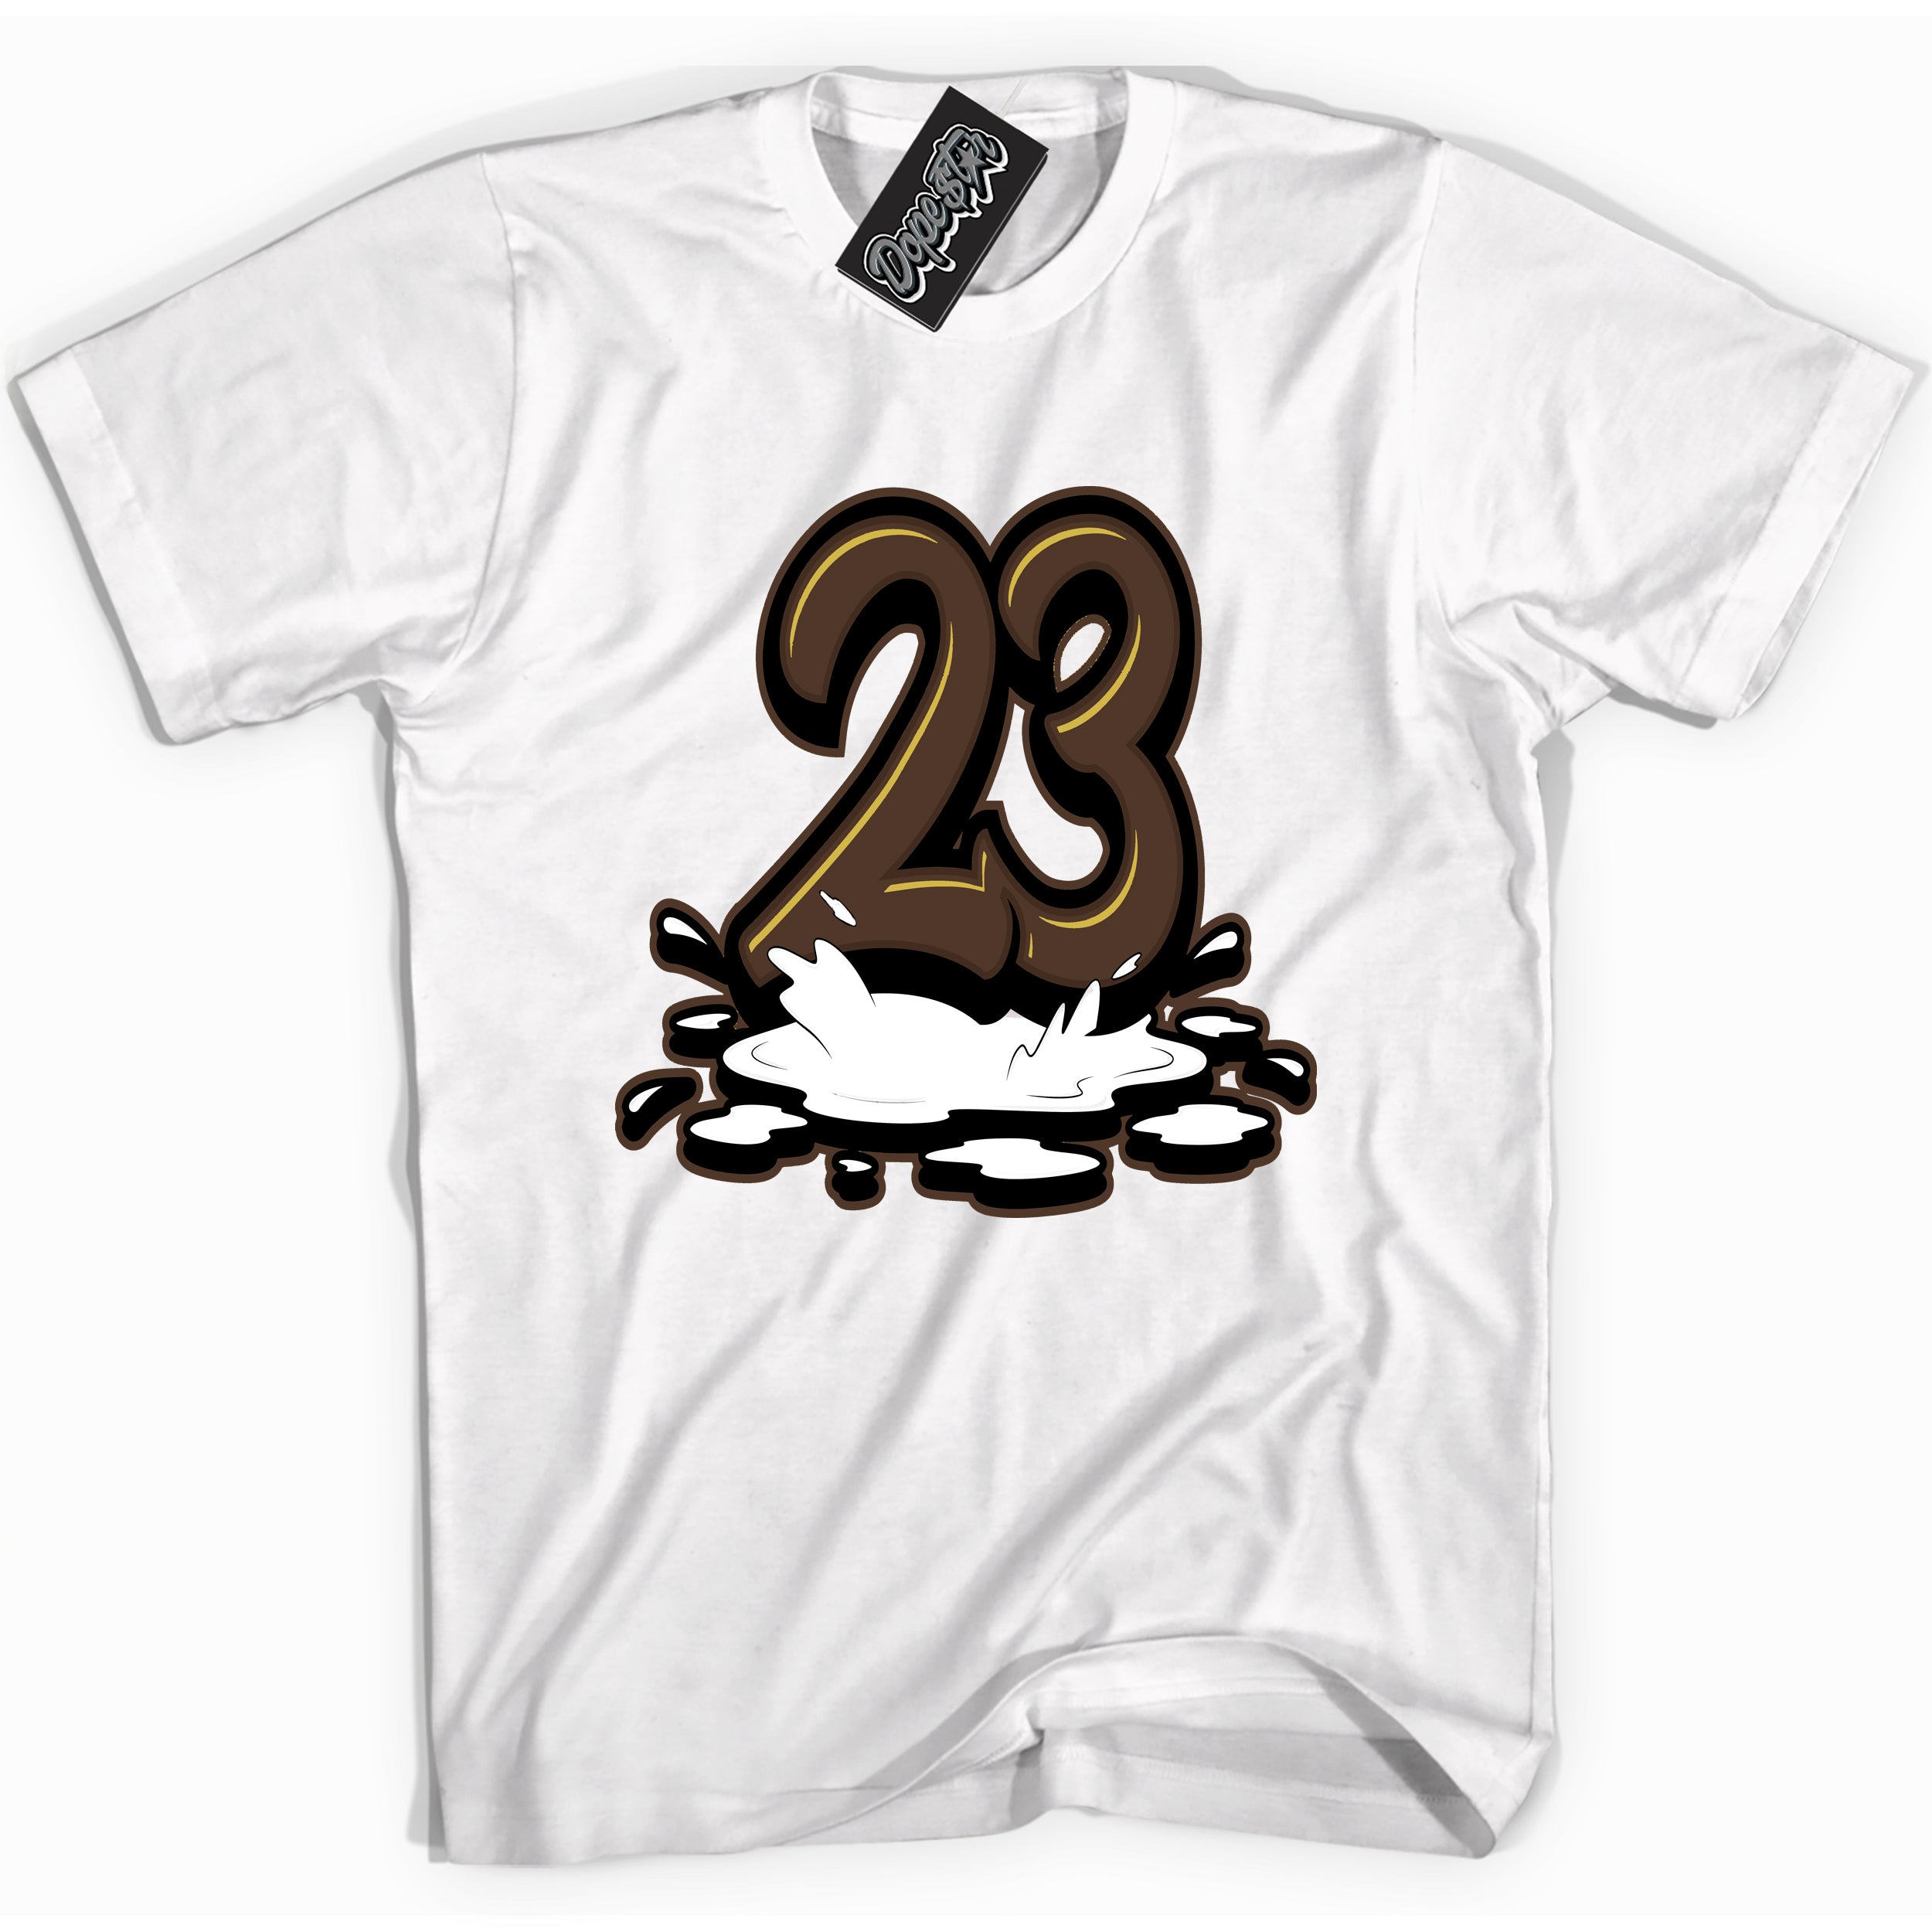 Cool White graphic tee with “ 23 Melting ” design, that perfectly matches Palomino 1s sneakers 